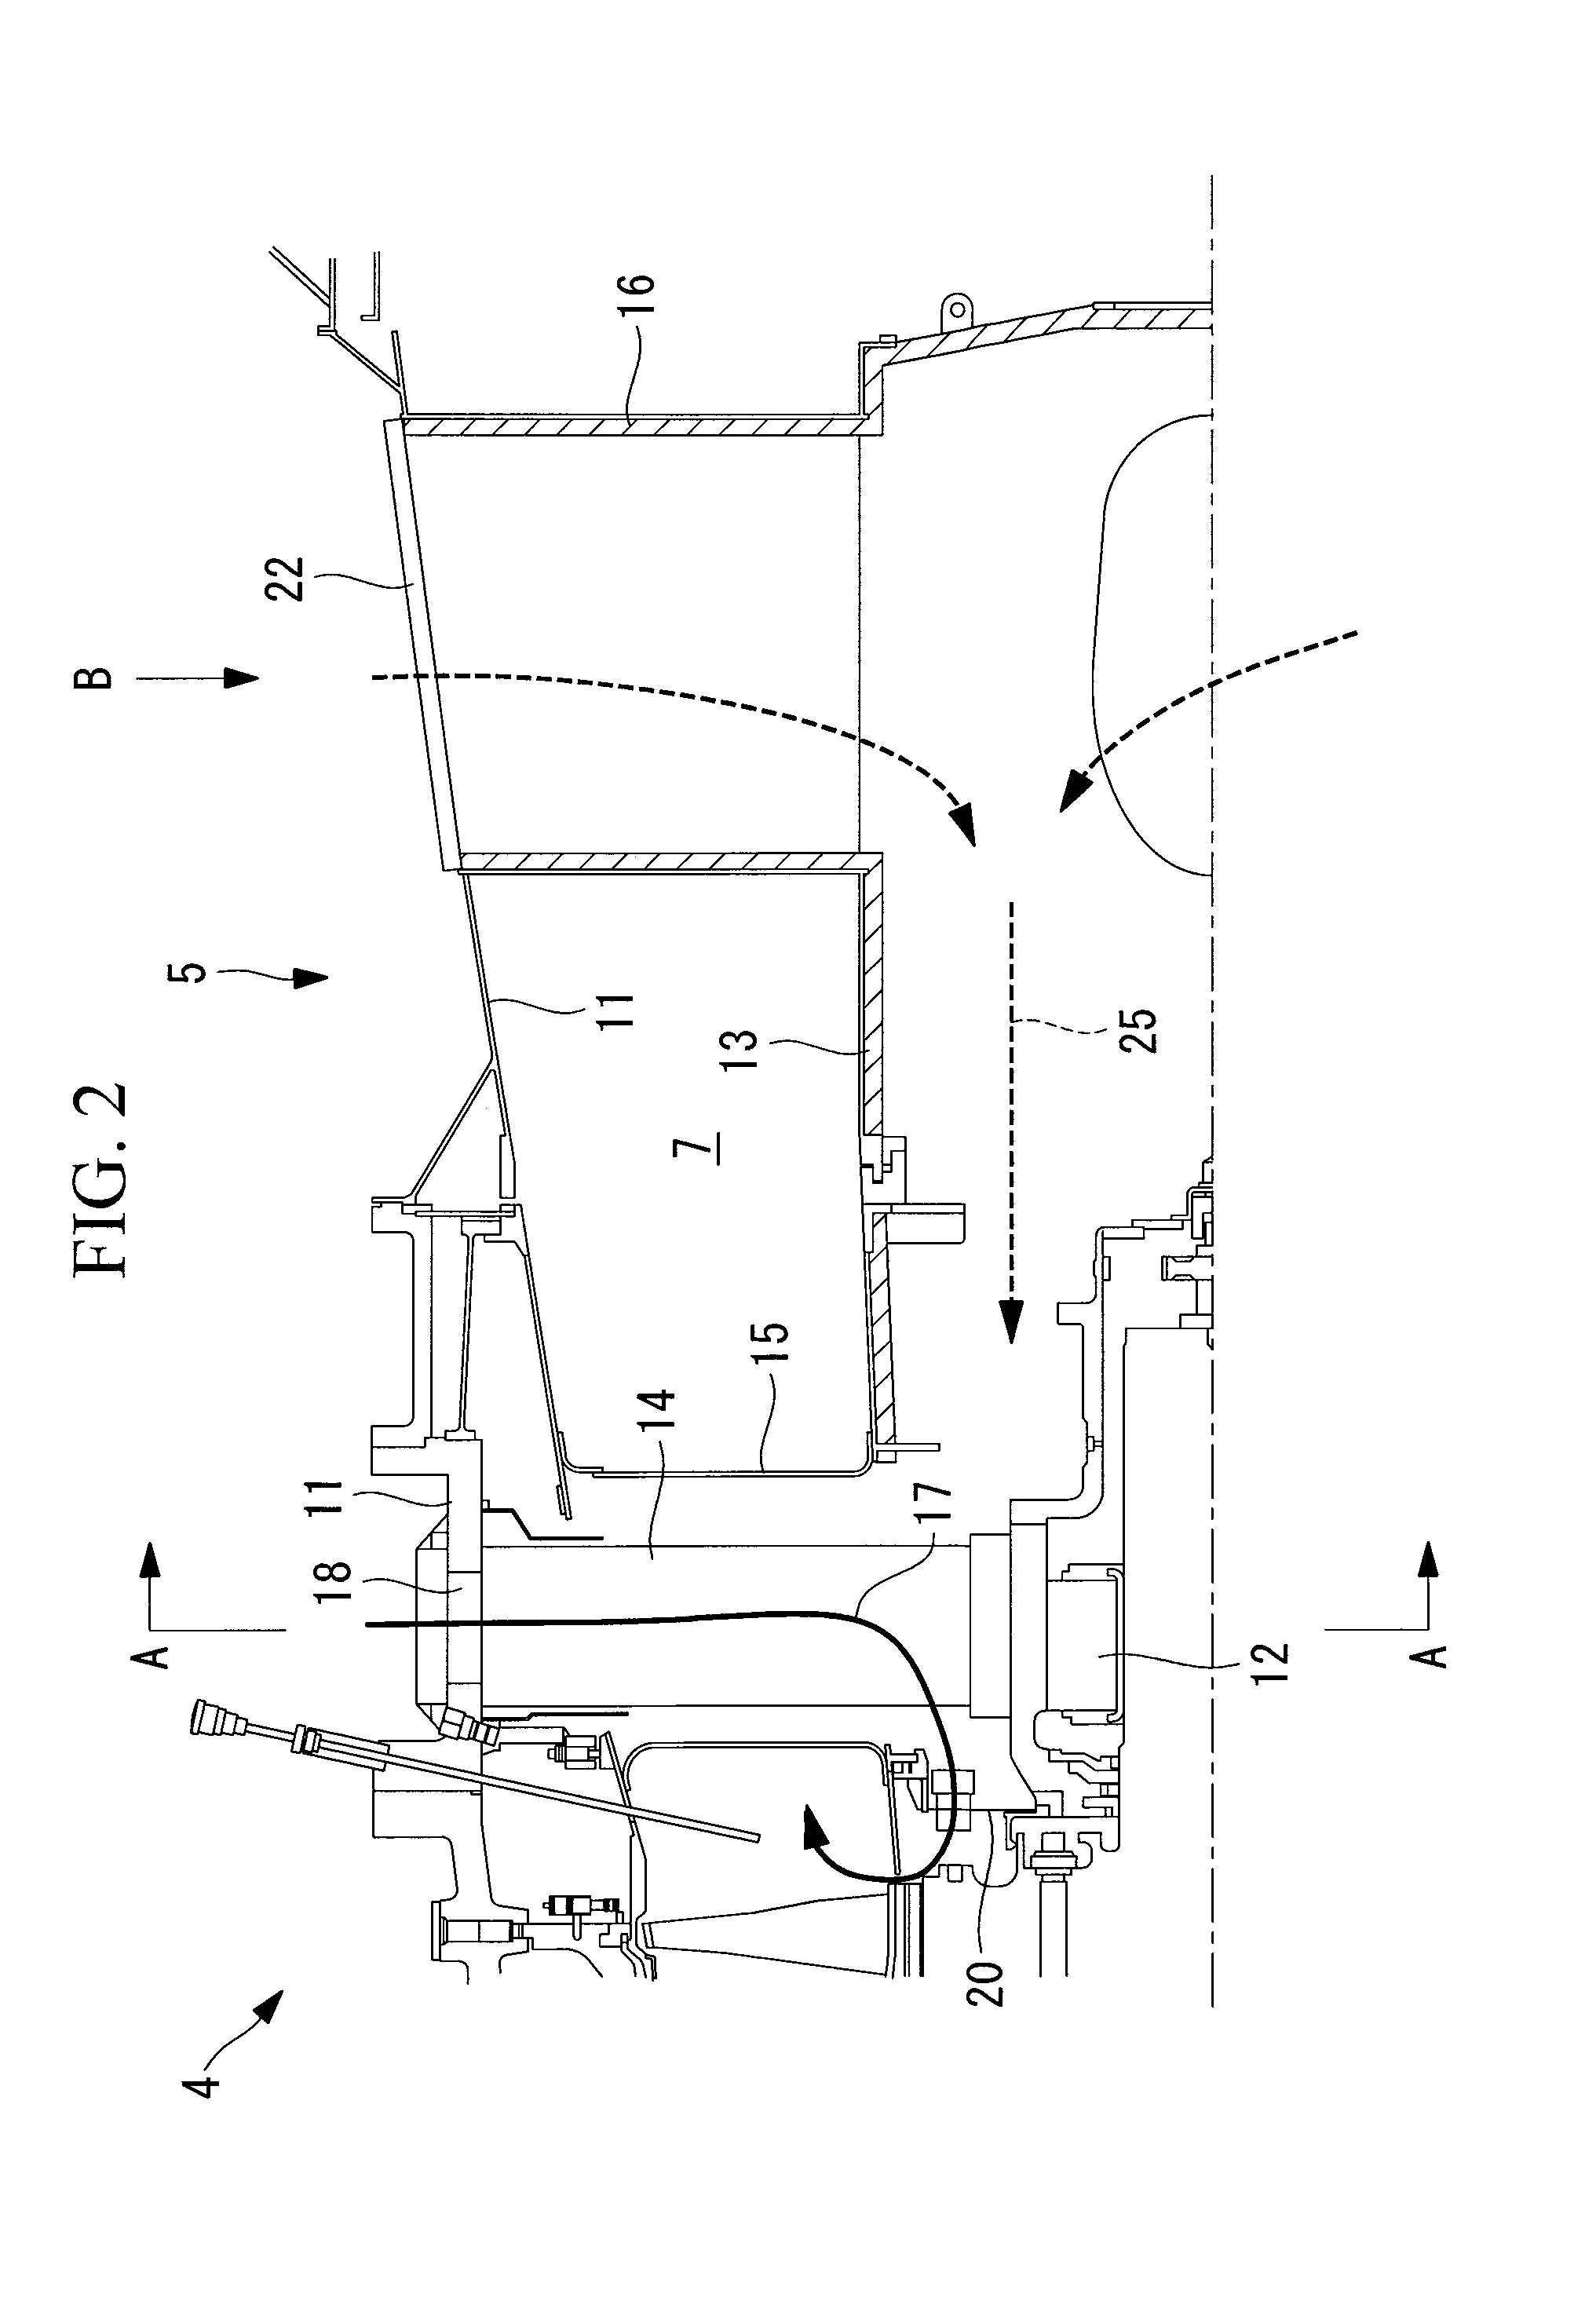 Structure of exhaust section of gas turbine and gas turbine